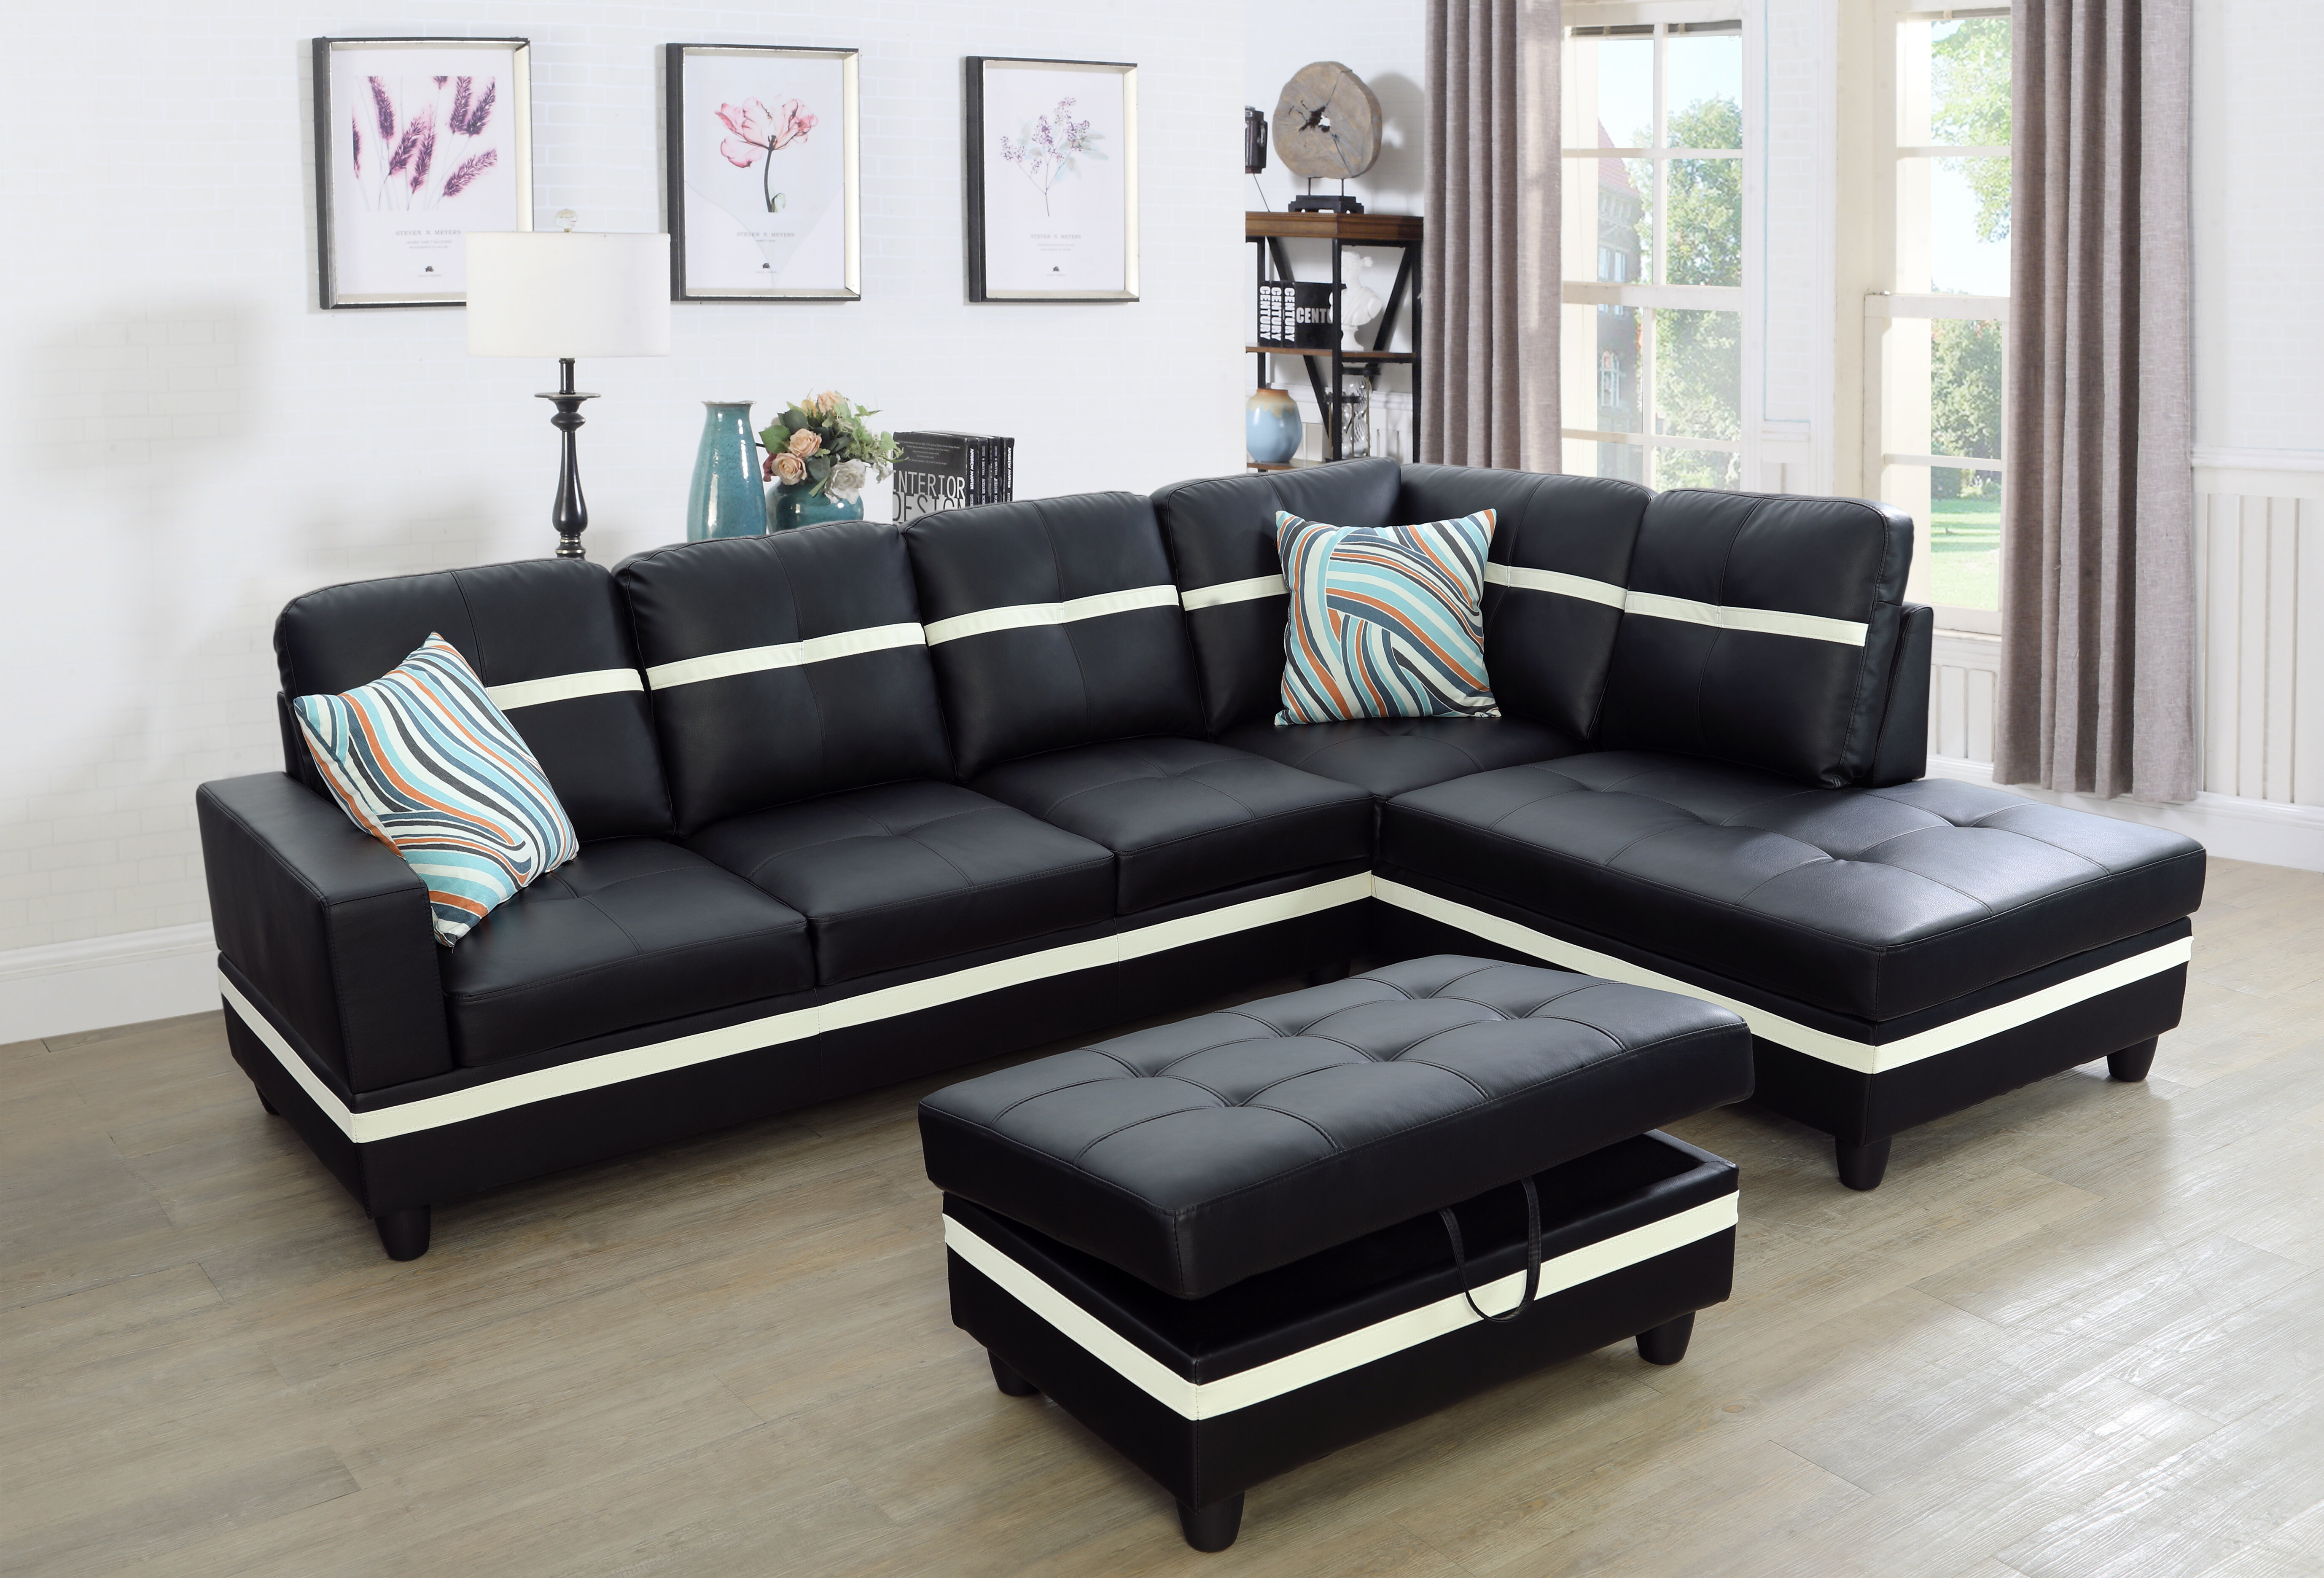 Wilhelmine 103.5″ Wide Faux Leather Sofa & Chaise with Ottoman